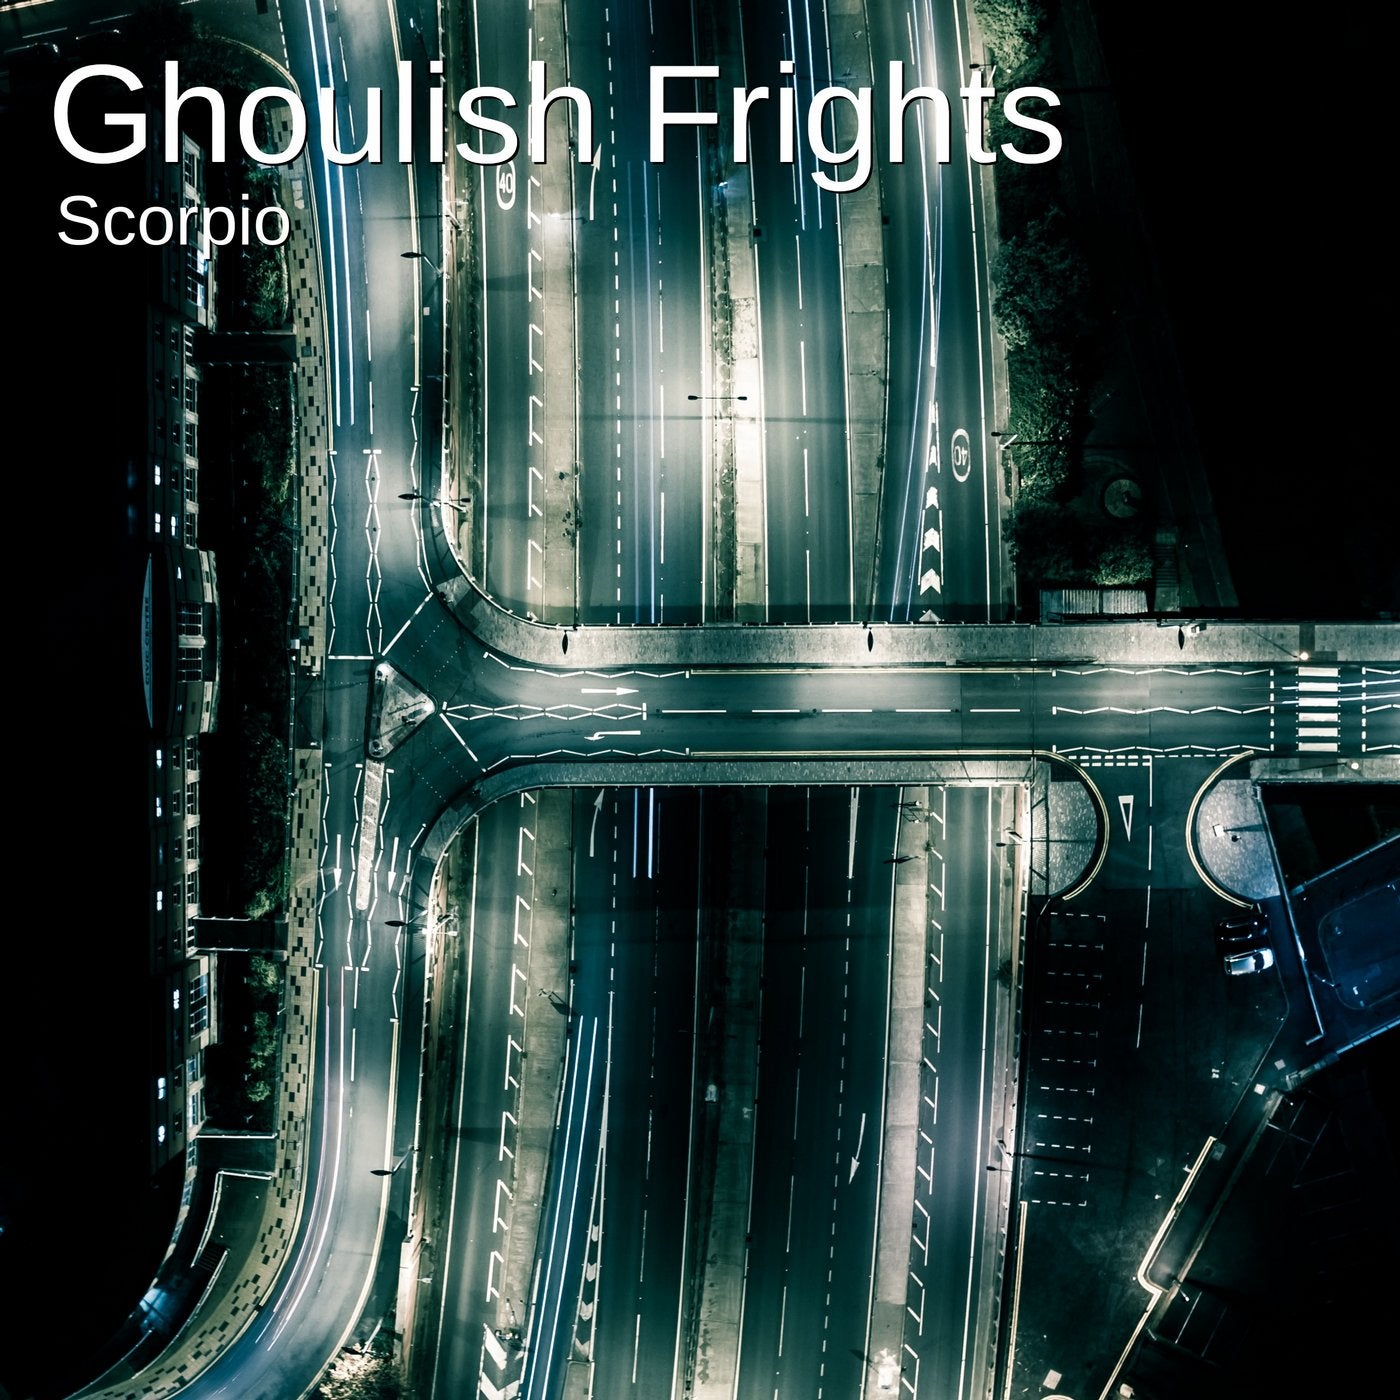 Ghoulish Frights